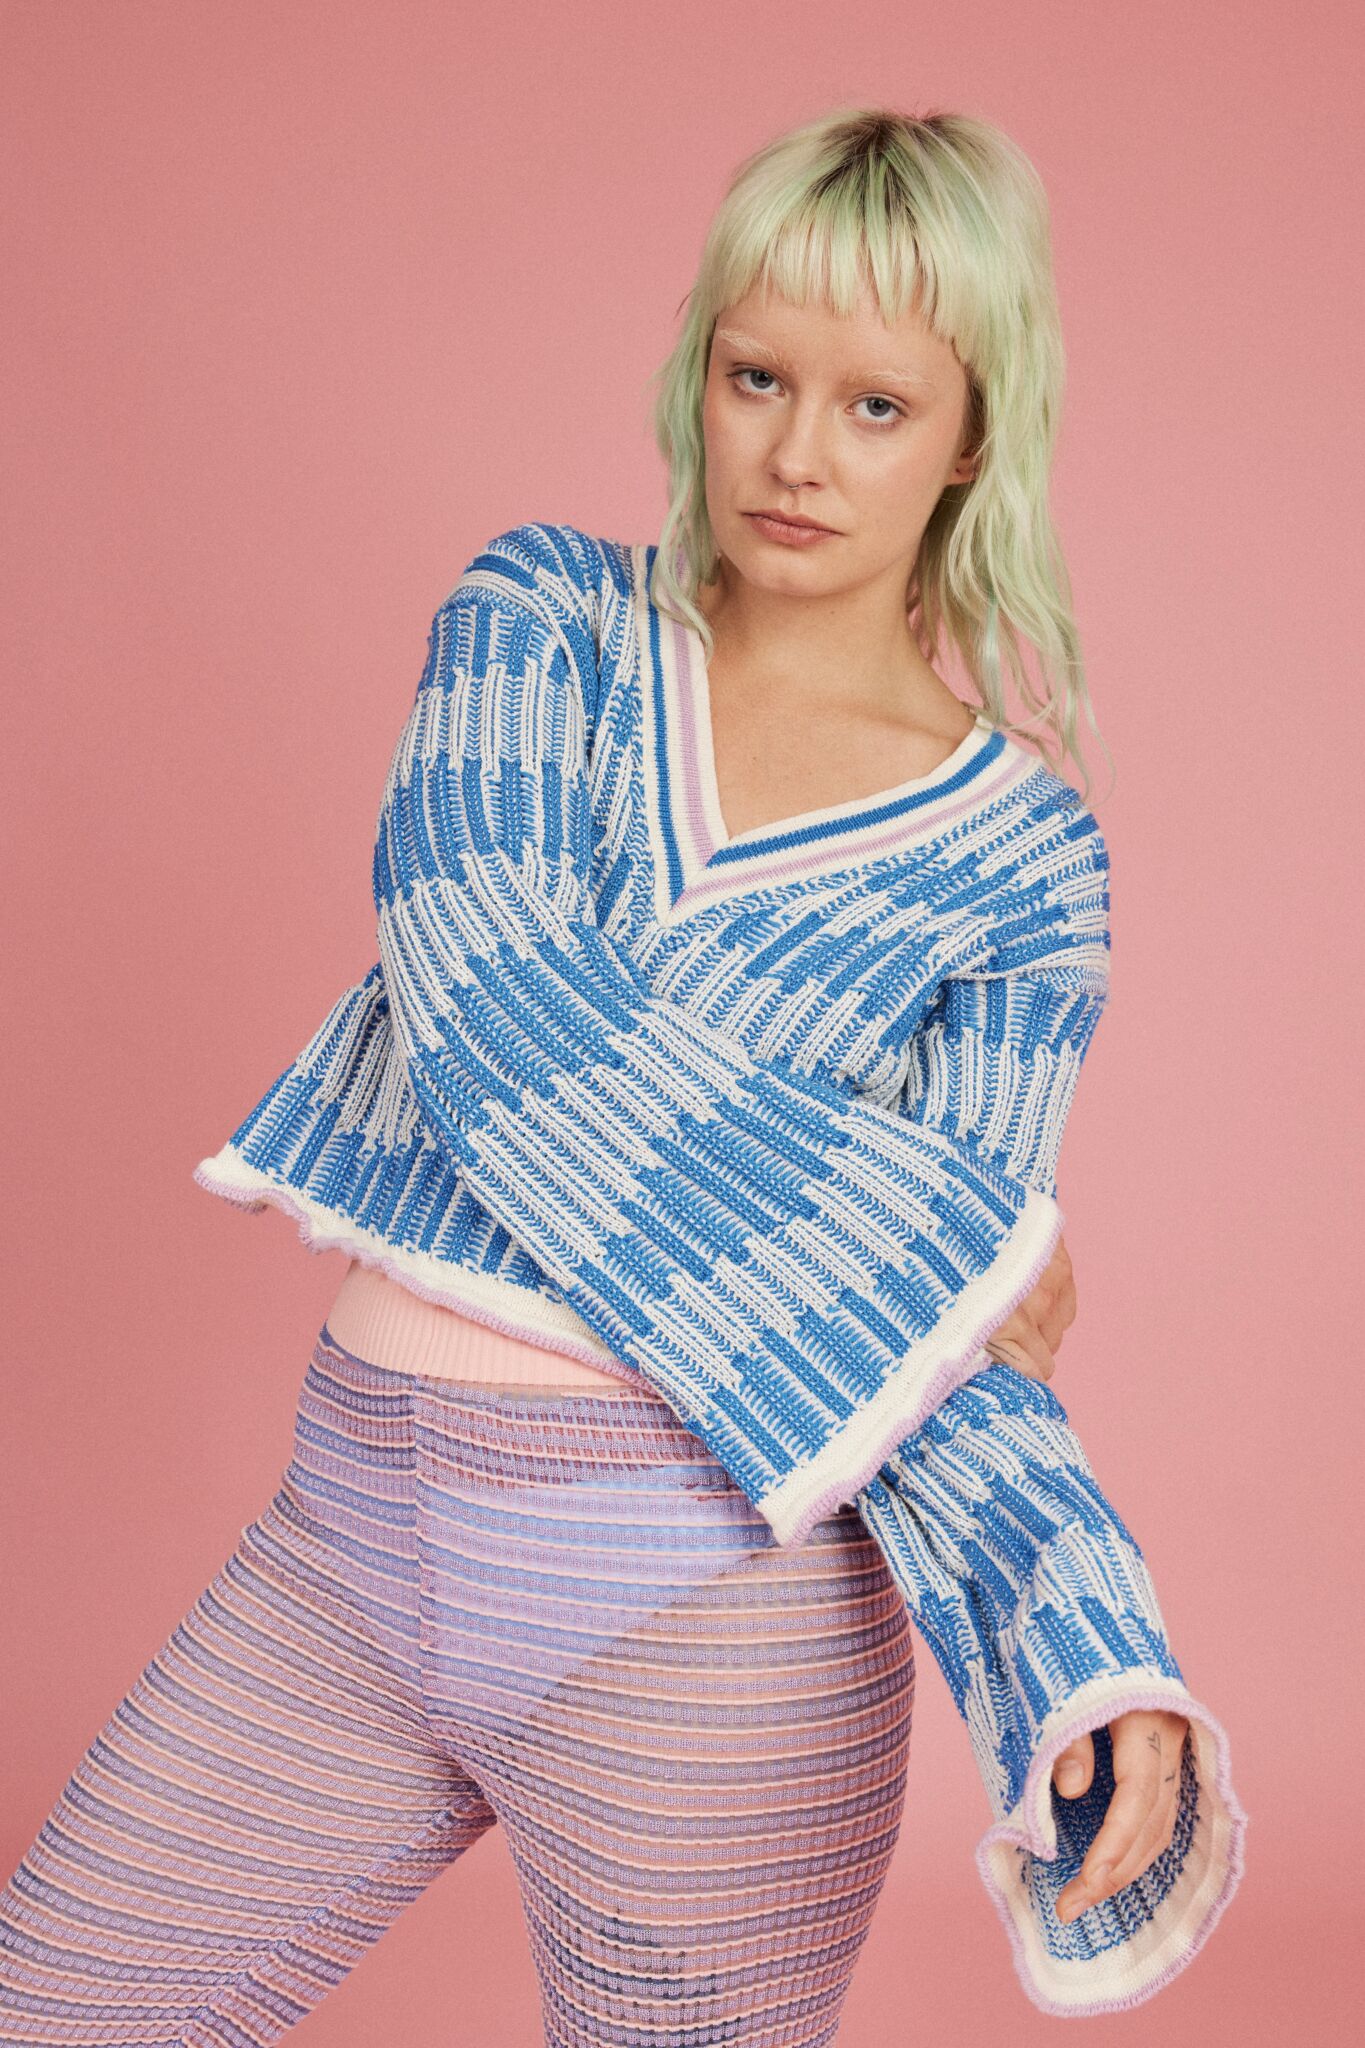 Loveable Loop shot by Amelia Lourie. Wavy Chess Jumper in blue.